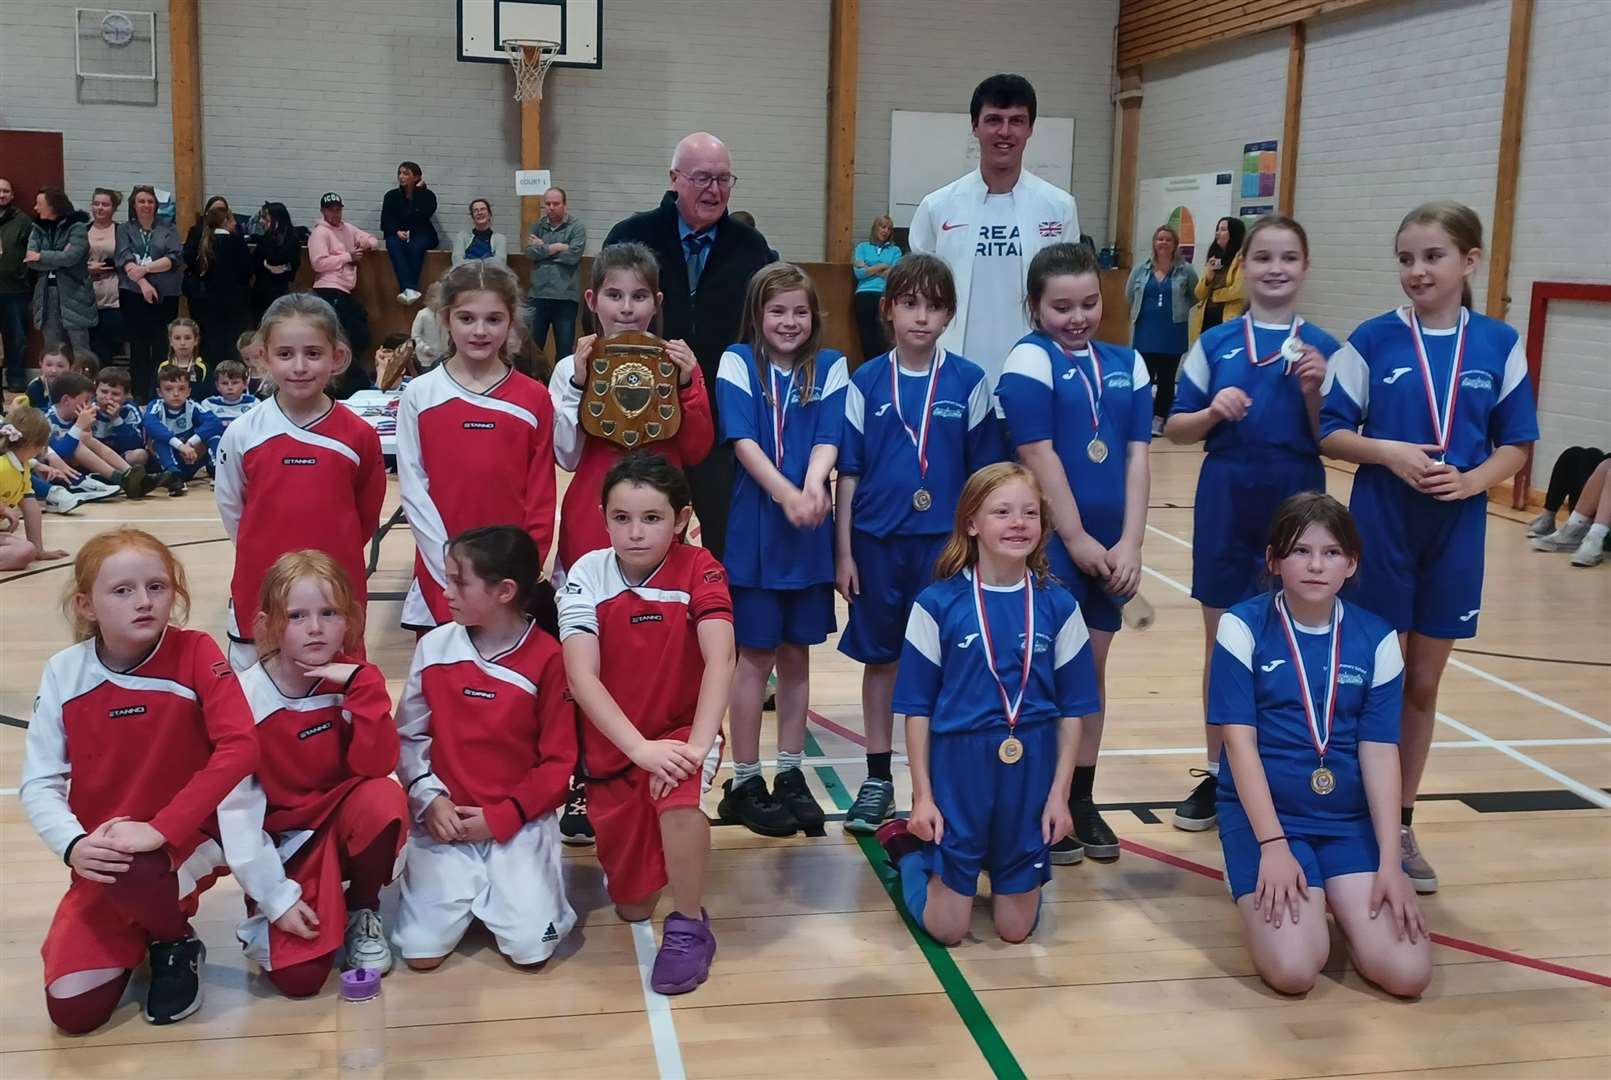 Teams from Brora and Dornoch were joint winners in the Big Schools girls' category.